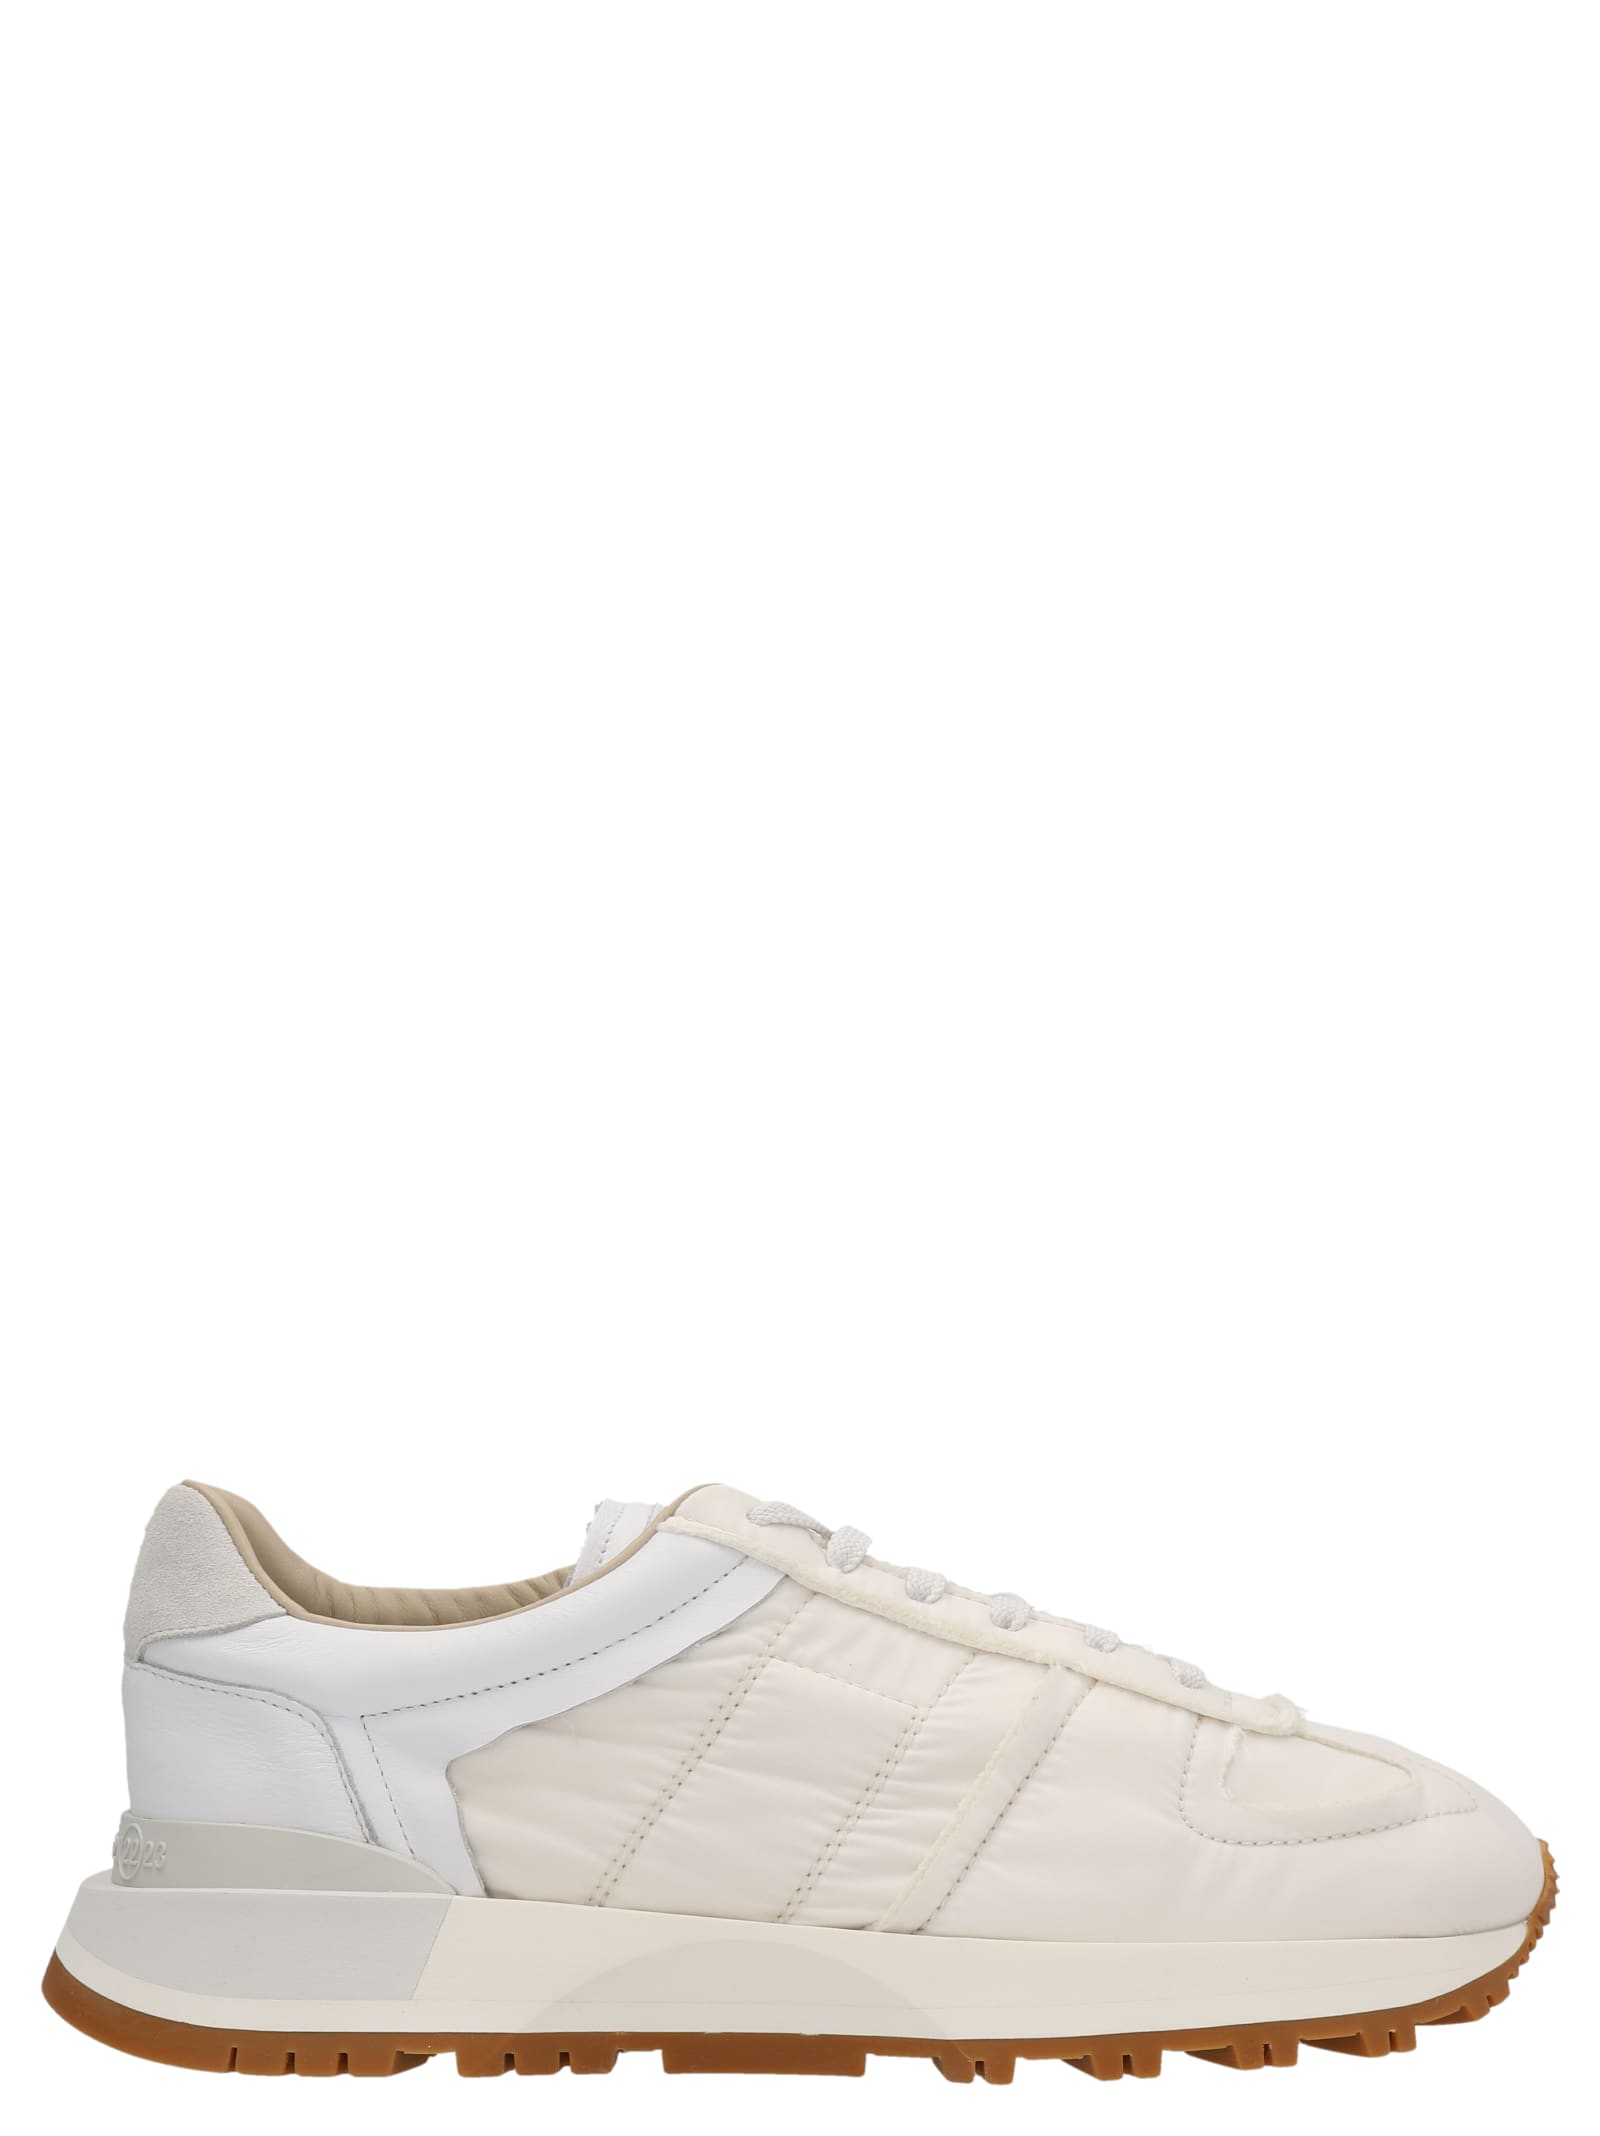 Maison Margiela 50/50 Trainers In White